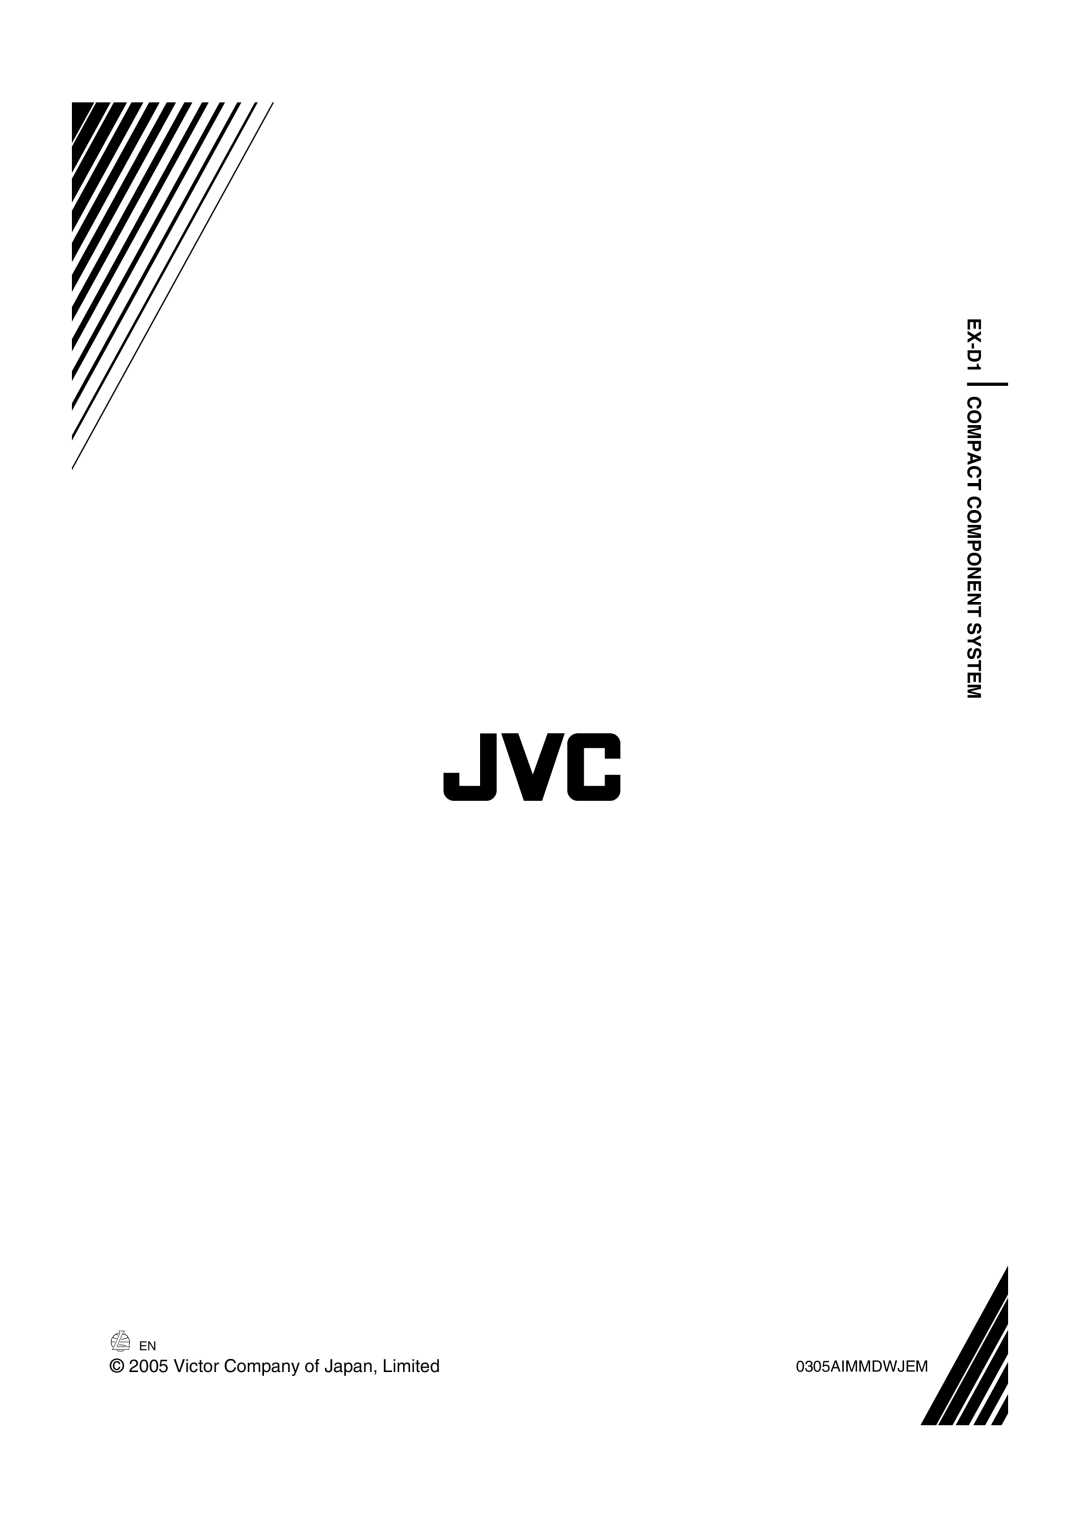 JVC GVT0143-008A manual EX-D1 COMPACT COMPONENT SYSTEM, c 2005 Victor Company of Japan, Limited 